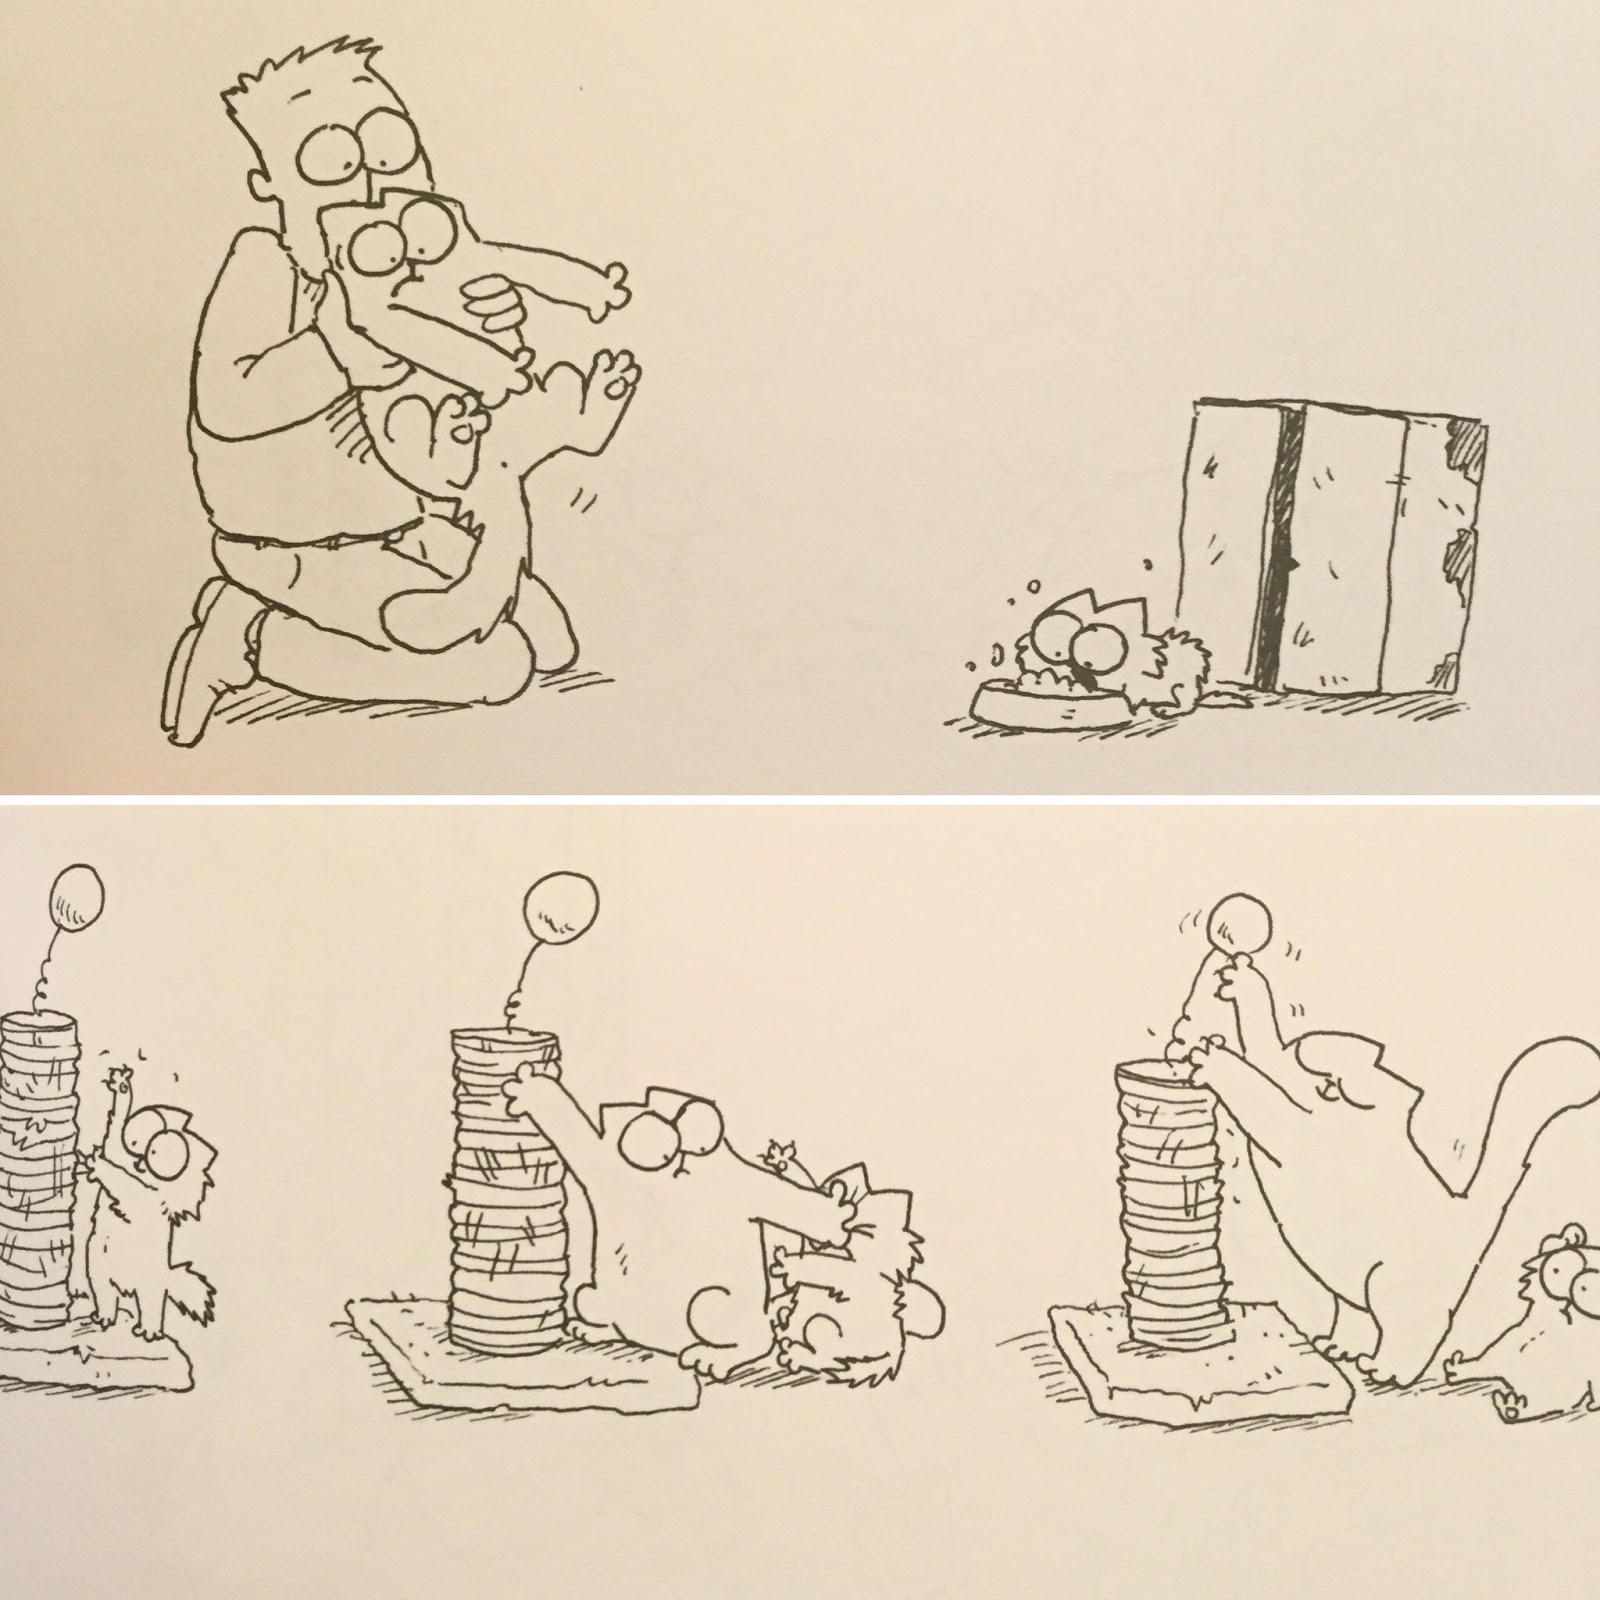 Here are just a couple of my favourite drawings from the book to give you a better idea of what s included